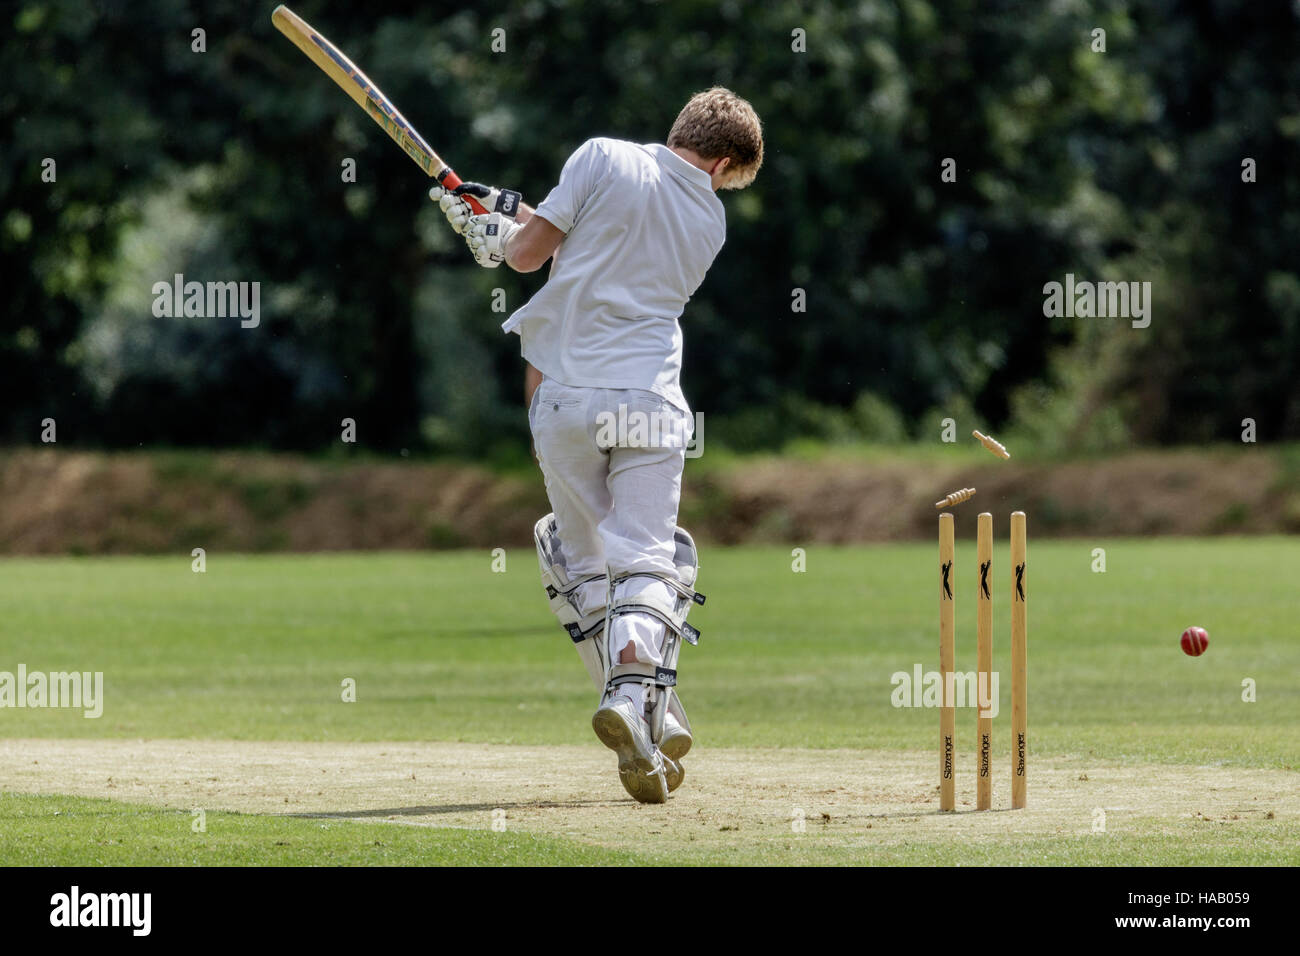 A batsman is clean bowled during a village cricket match Stock Photo